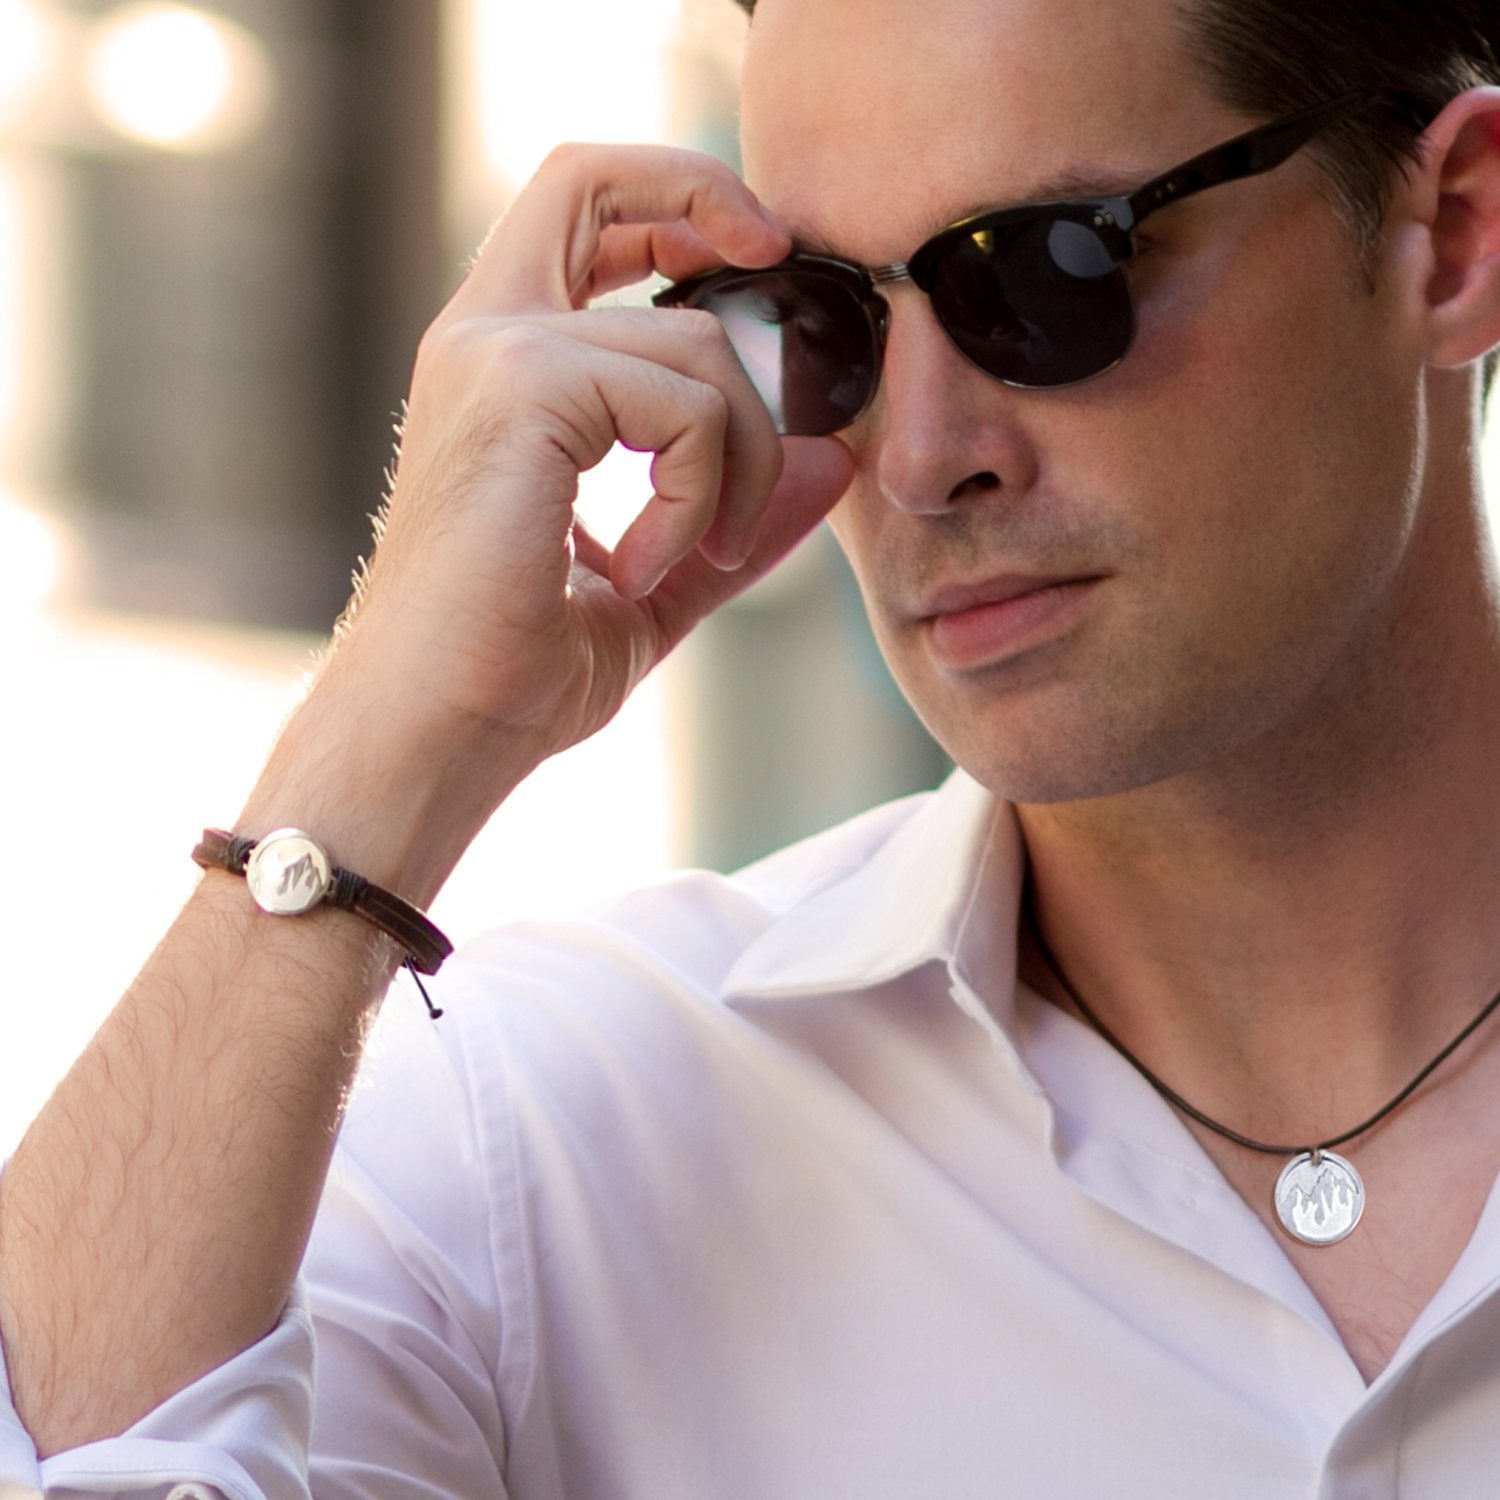 Image shows a close up of a man with brown hair, wearing a white shirt and sunglasses. He is adjusting his sungalsses and showing a stainless steel round pendant with mountains engraved into their surface with leather thongs attaching the pendant as a bracelet, and the same pendant as a necklace hanging by a leather thong.